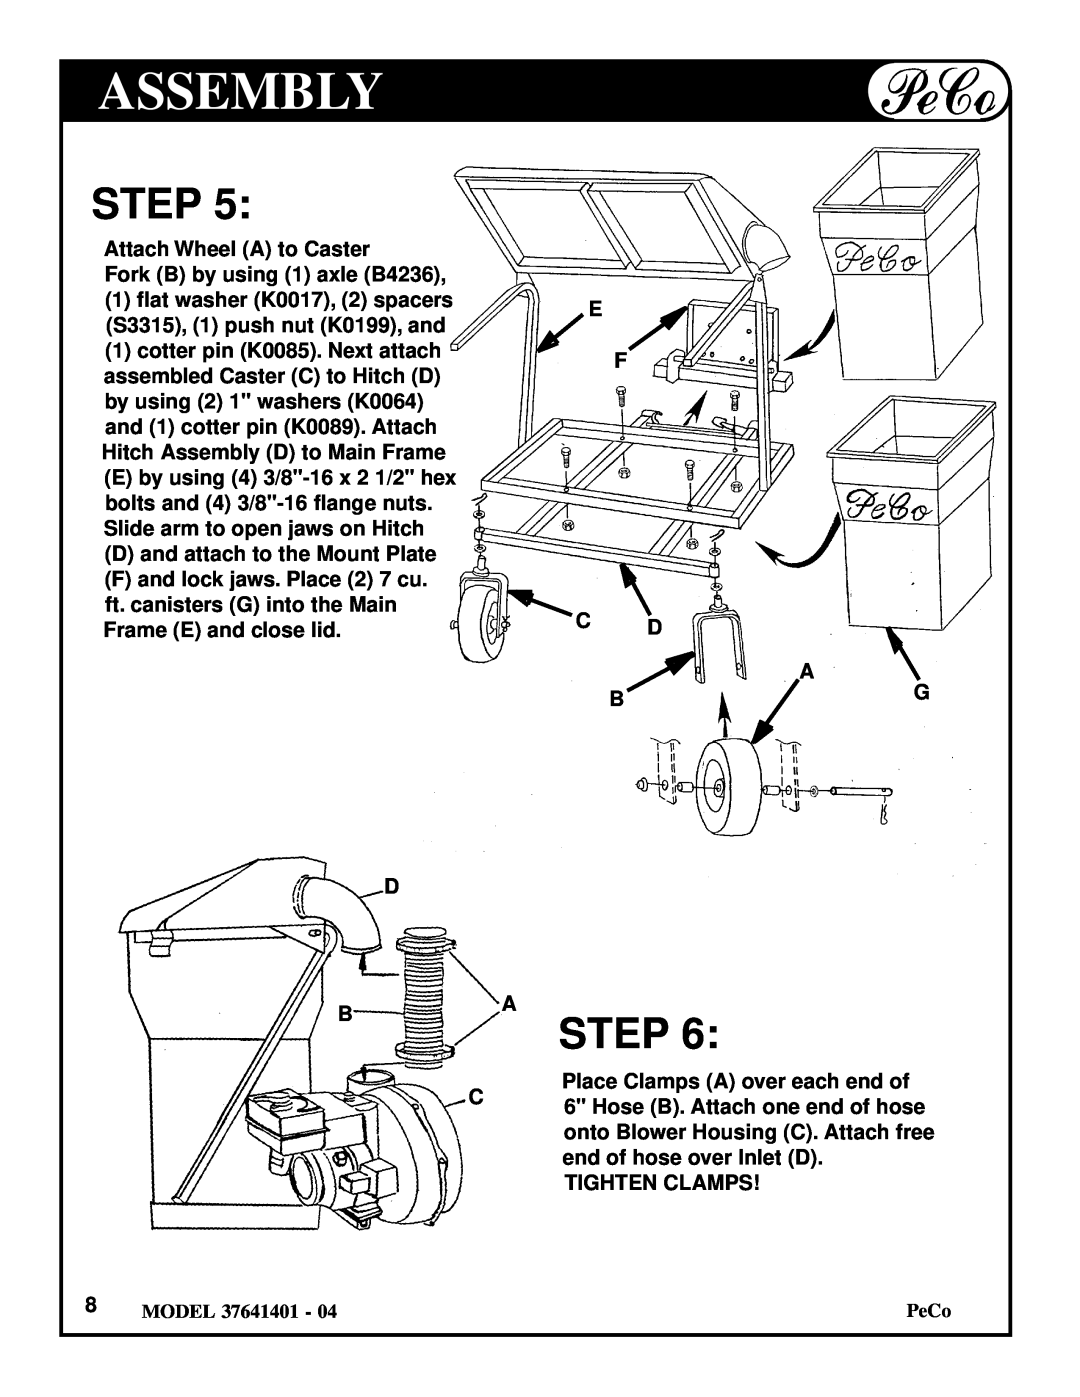 Briggs & Stratton 37641401 owner manual Assembly, Step, Attach Wheel A to Caster Fork B by using 1 axle B4236 